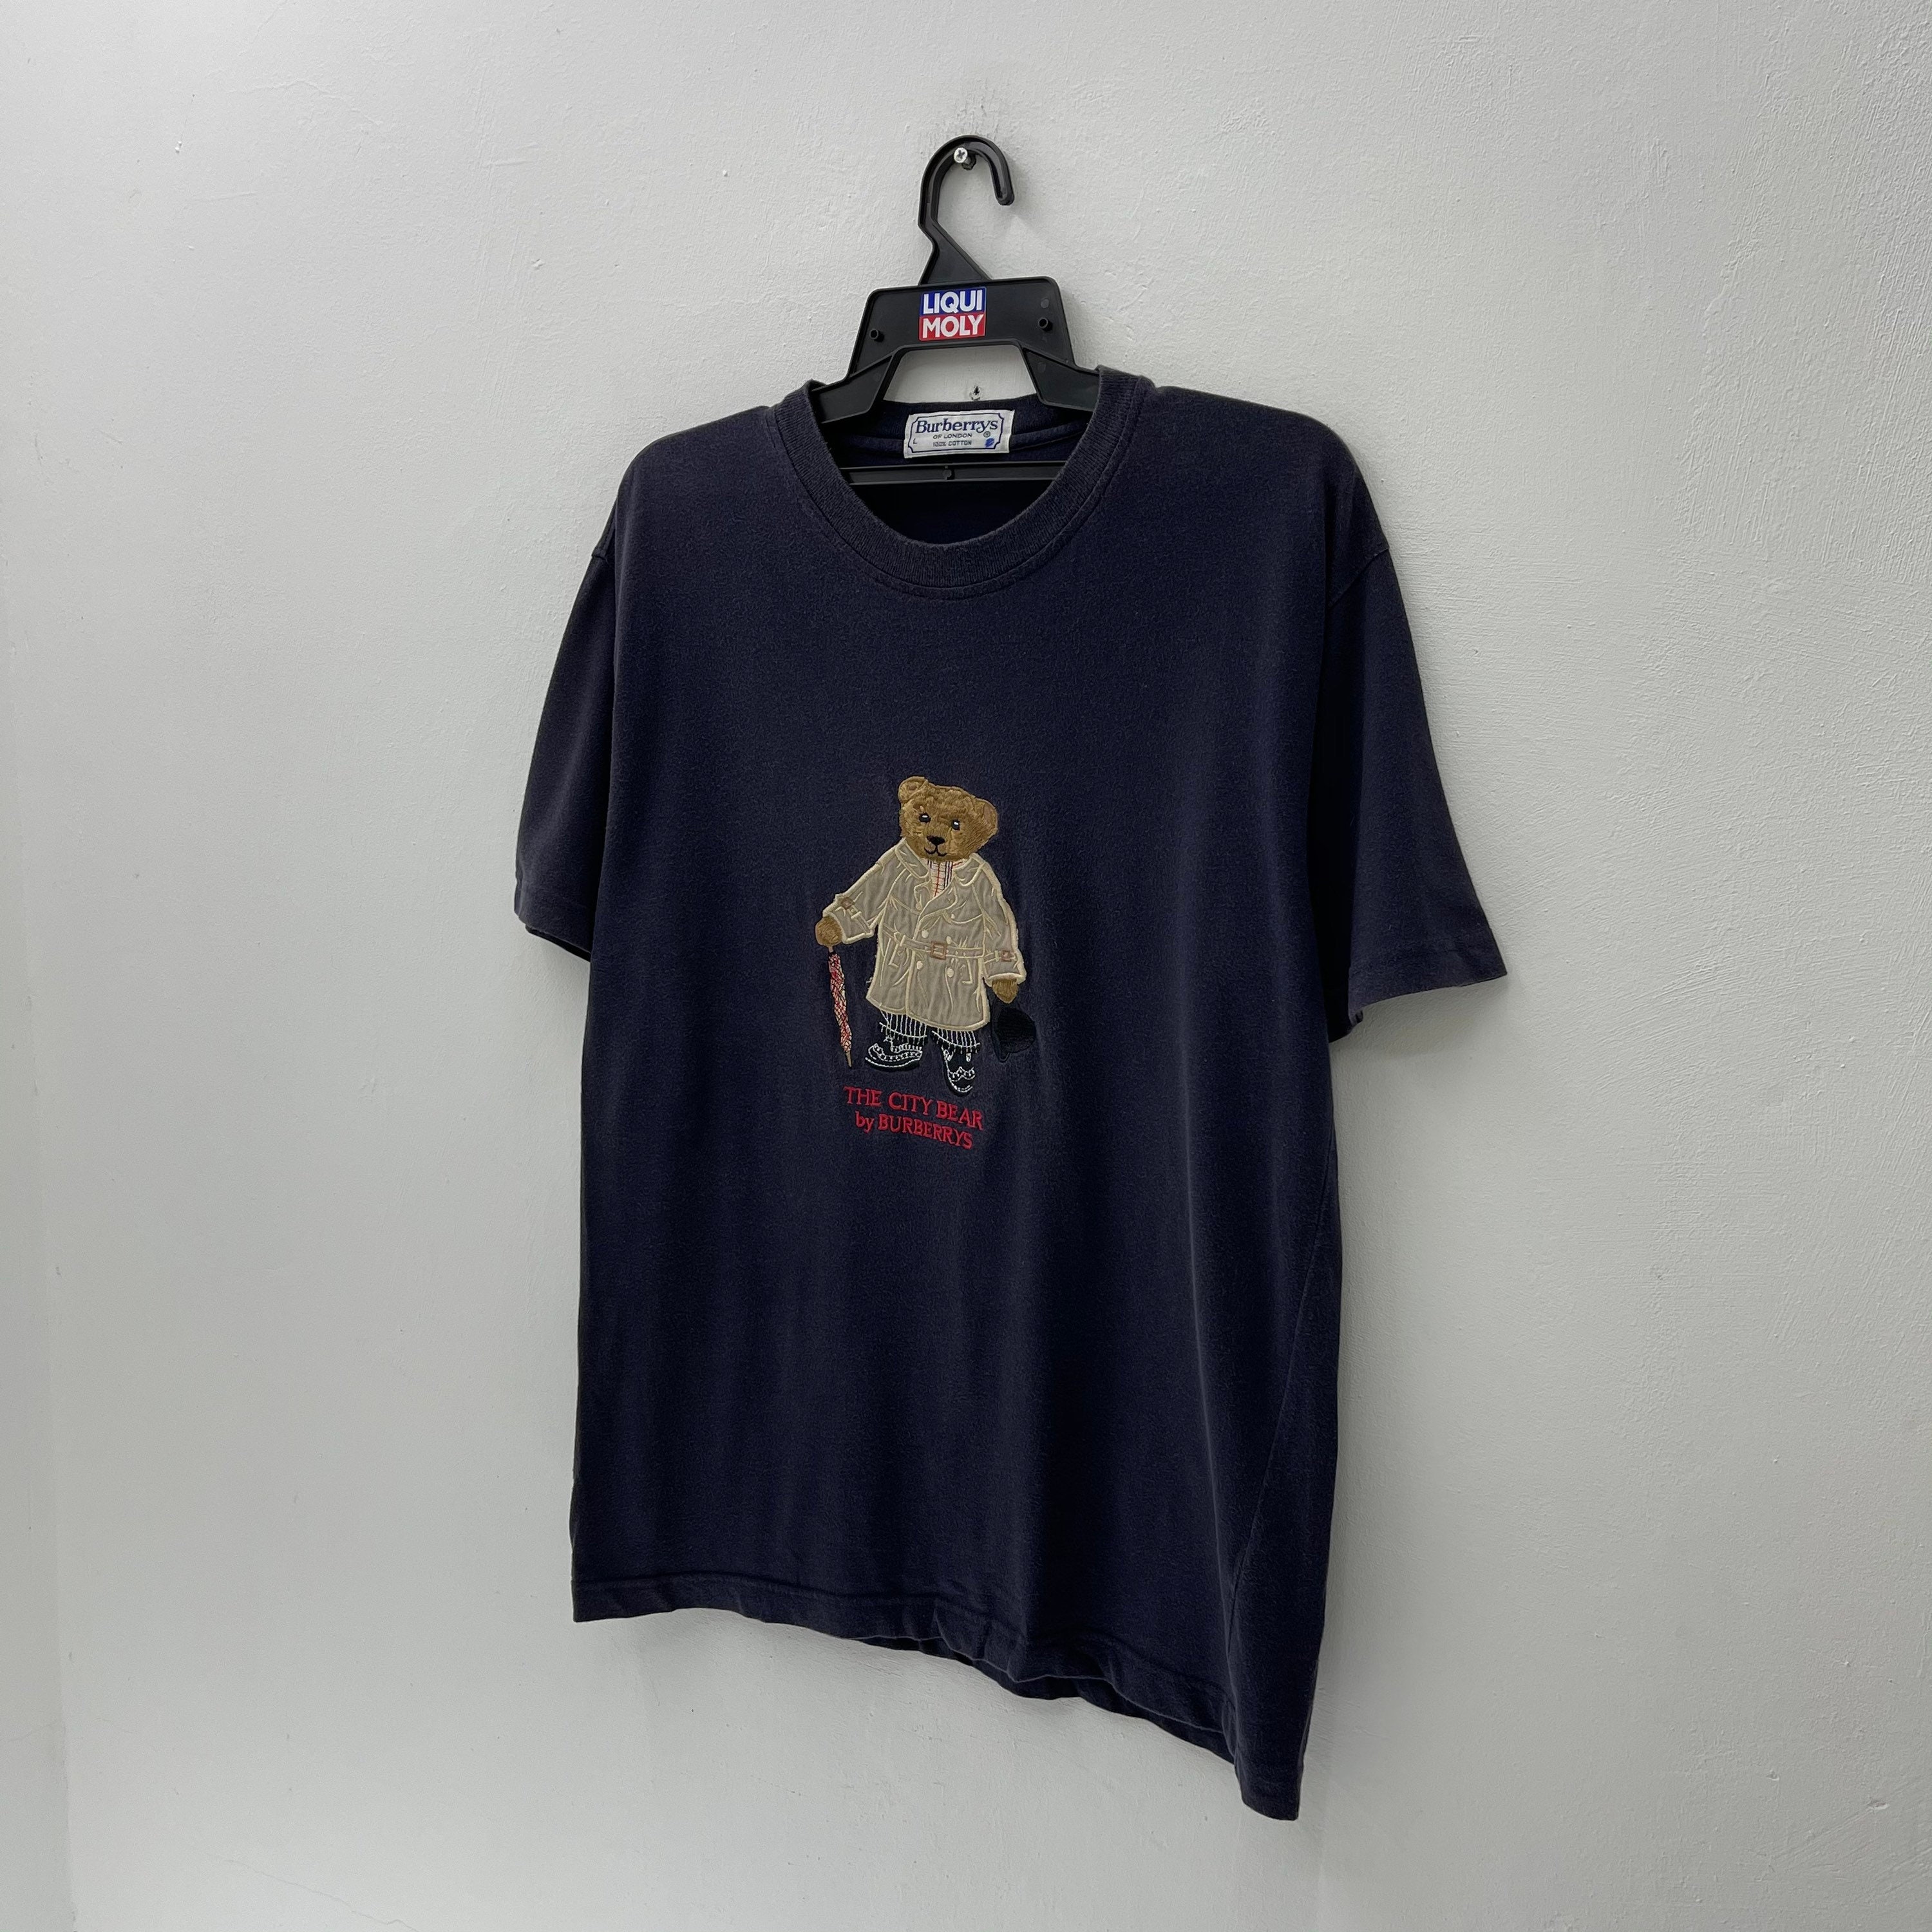 The City Bear By Burberrys Vintage 90s Burberry T-Shirt | Etsy